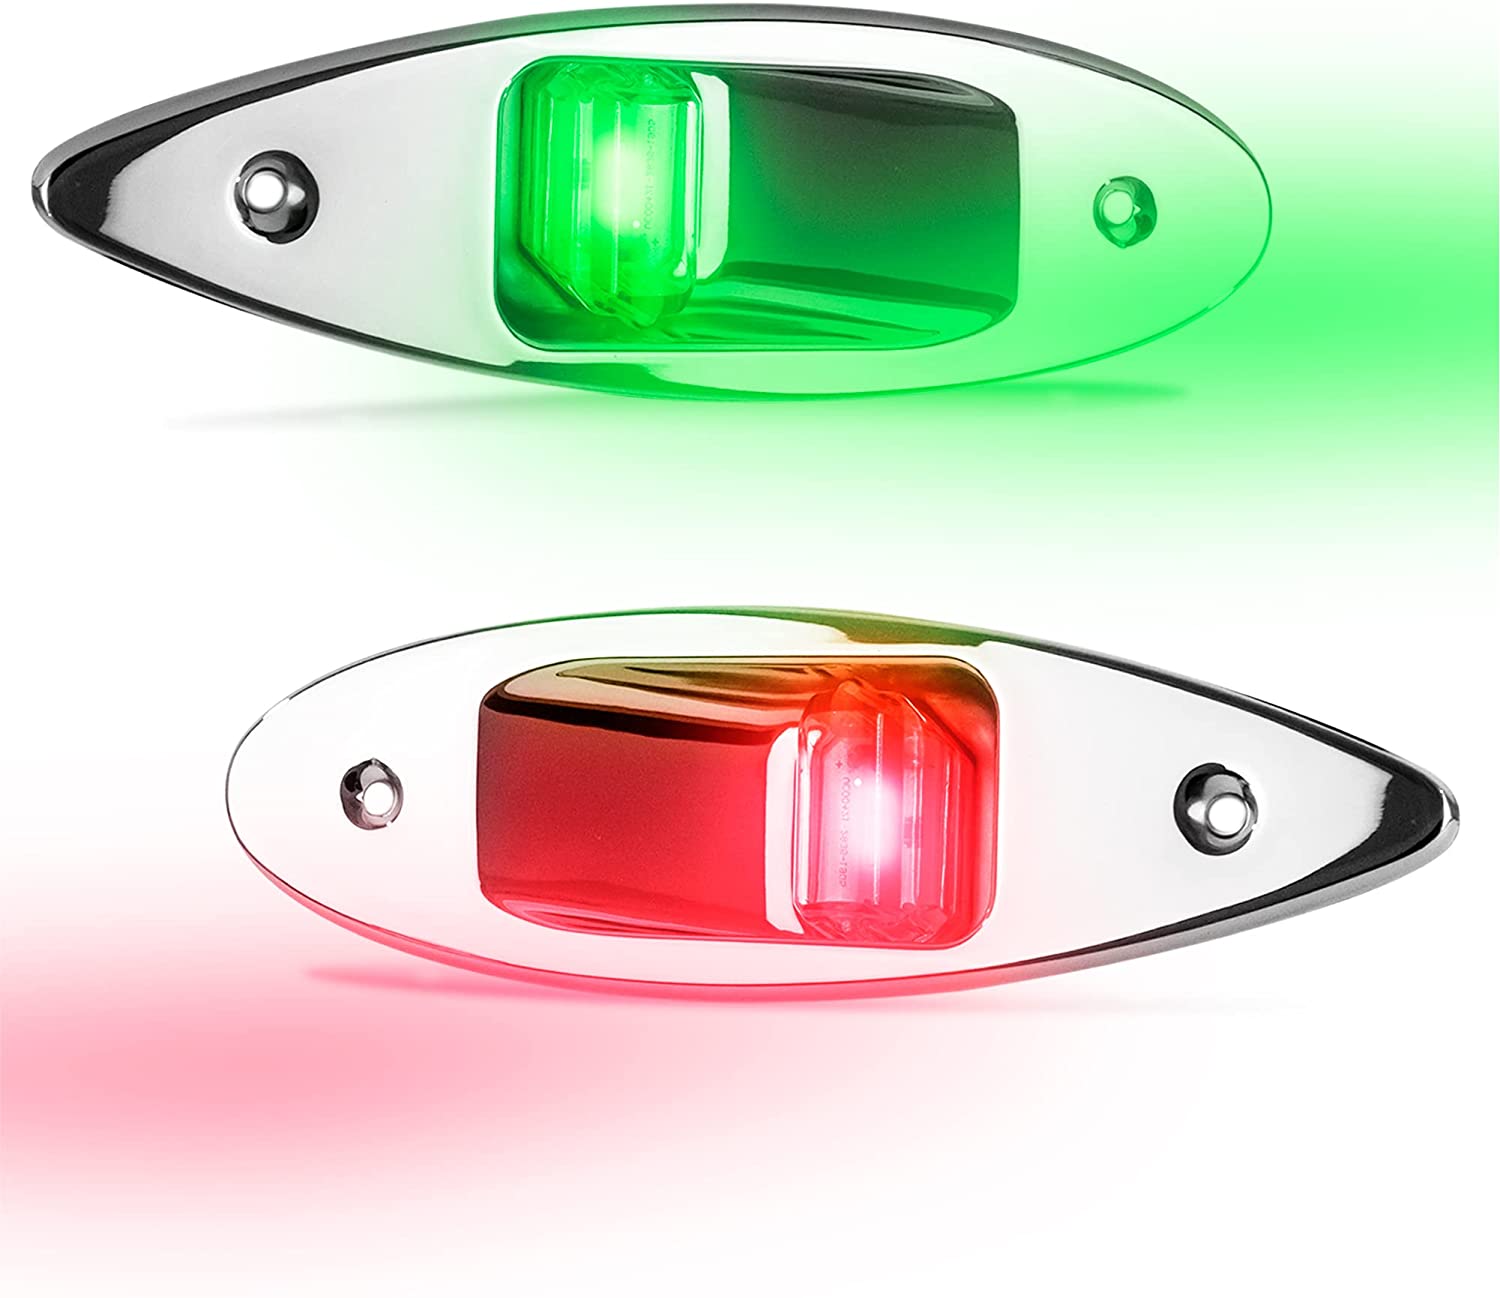 Vertical Mount LED Navigation Side Lights, Starboard (Green) and Port (Red), AISI304 Stainless Steel, 12 Volts, Visibility 2 NM-Canadian Marine &amp; Outdoor Equipment